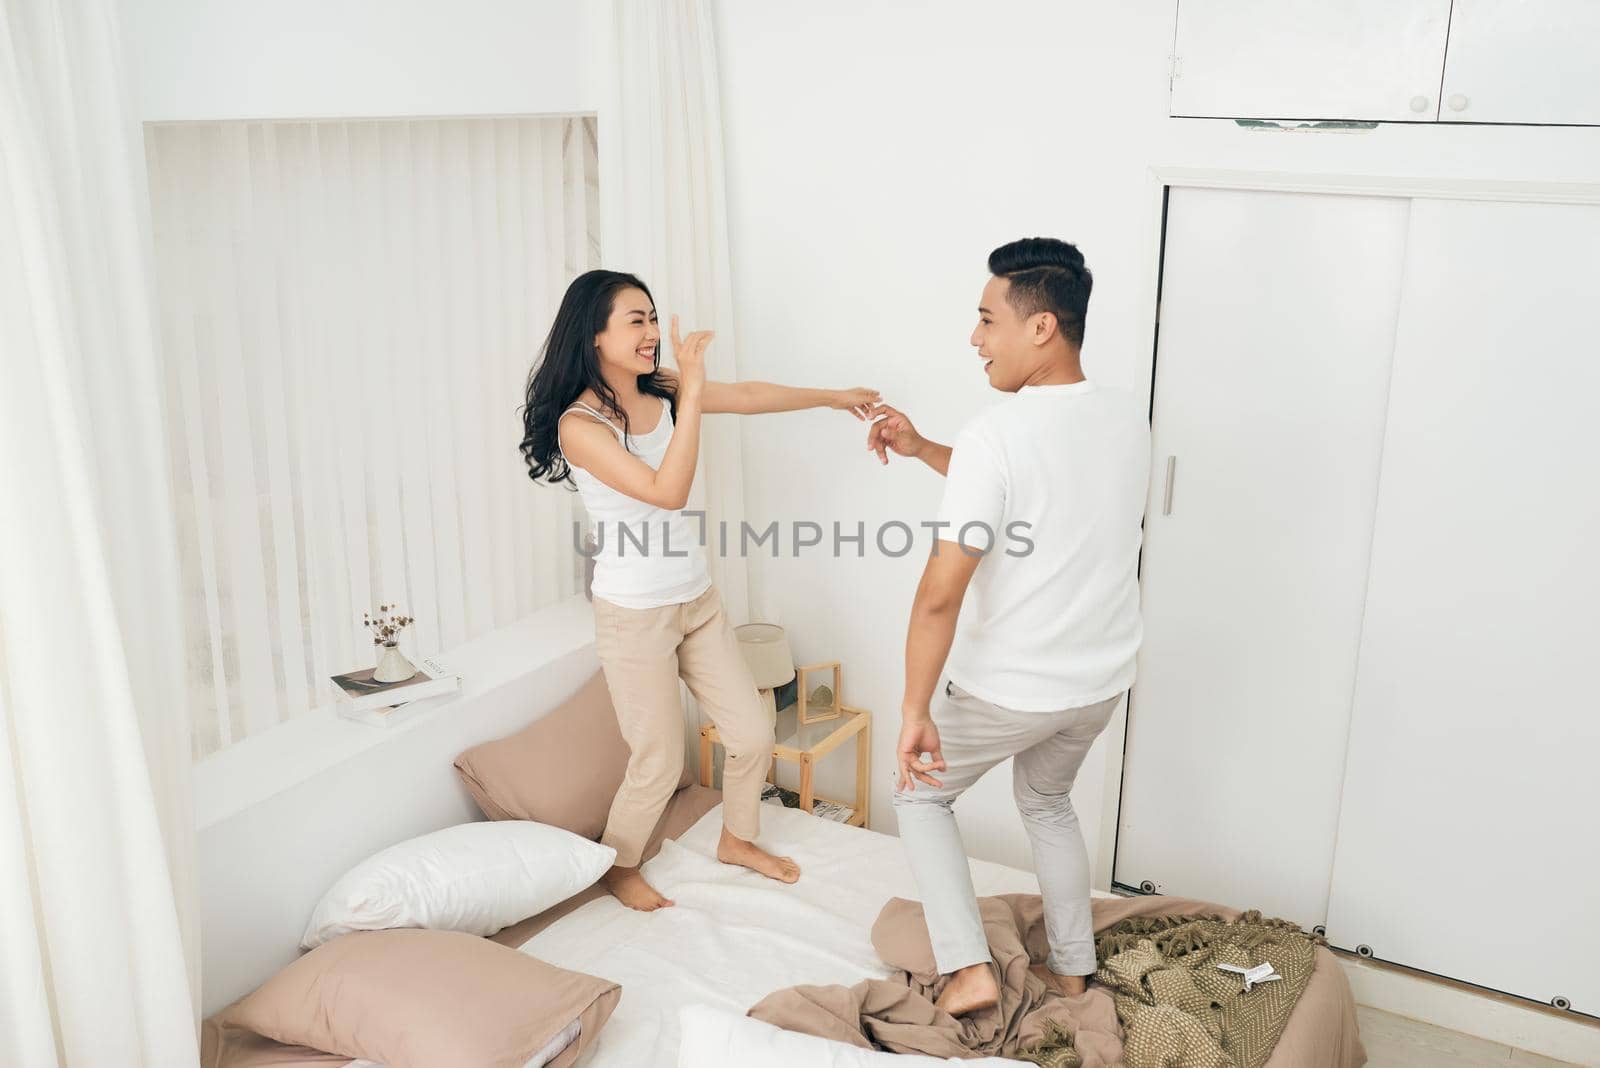 Dancing on the bed. Full length of beautiful young couple holding hands and smiling while dancing on the bed at home